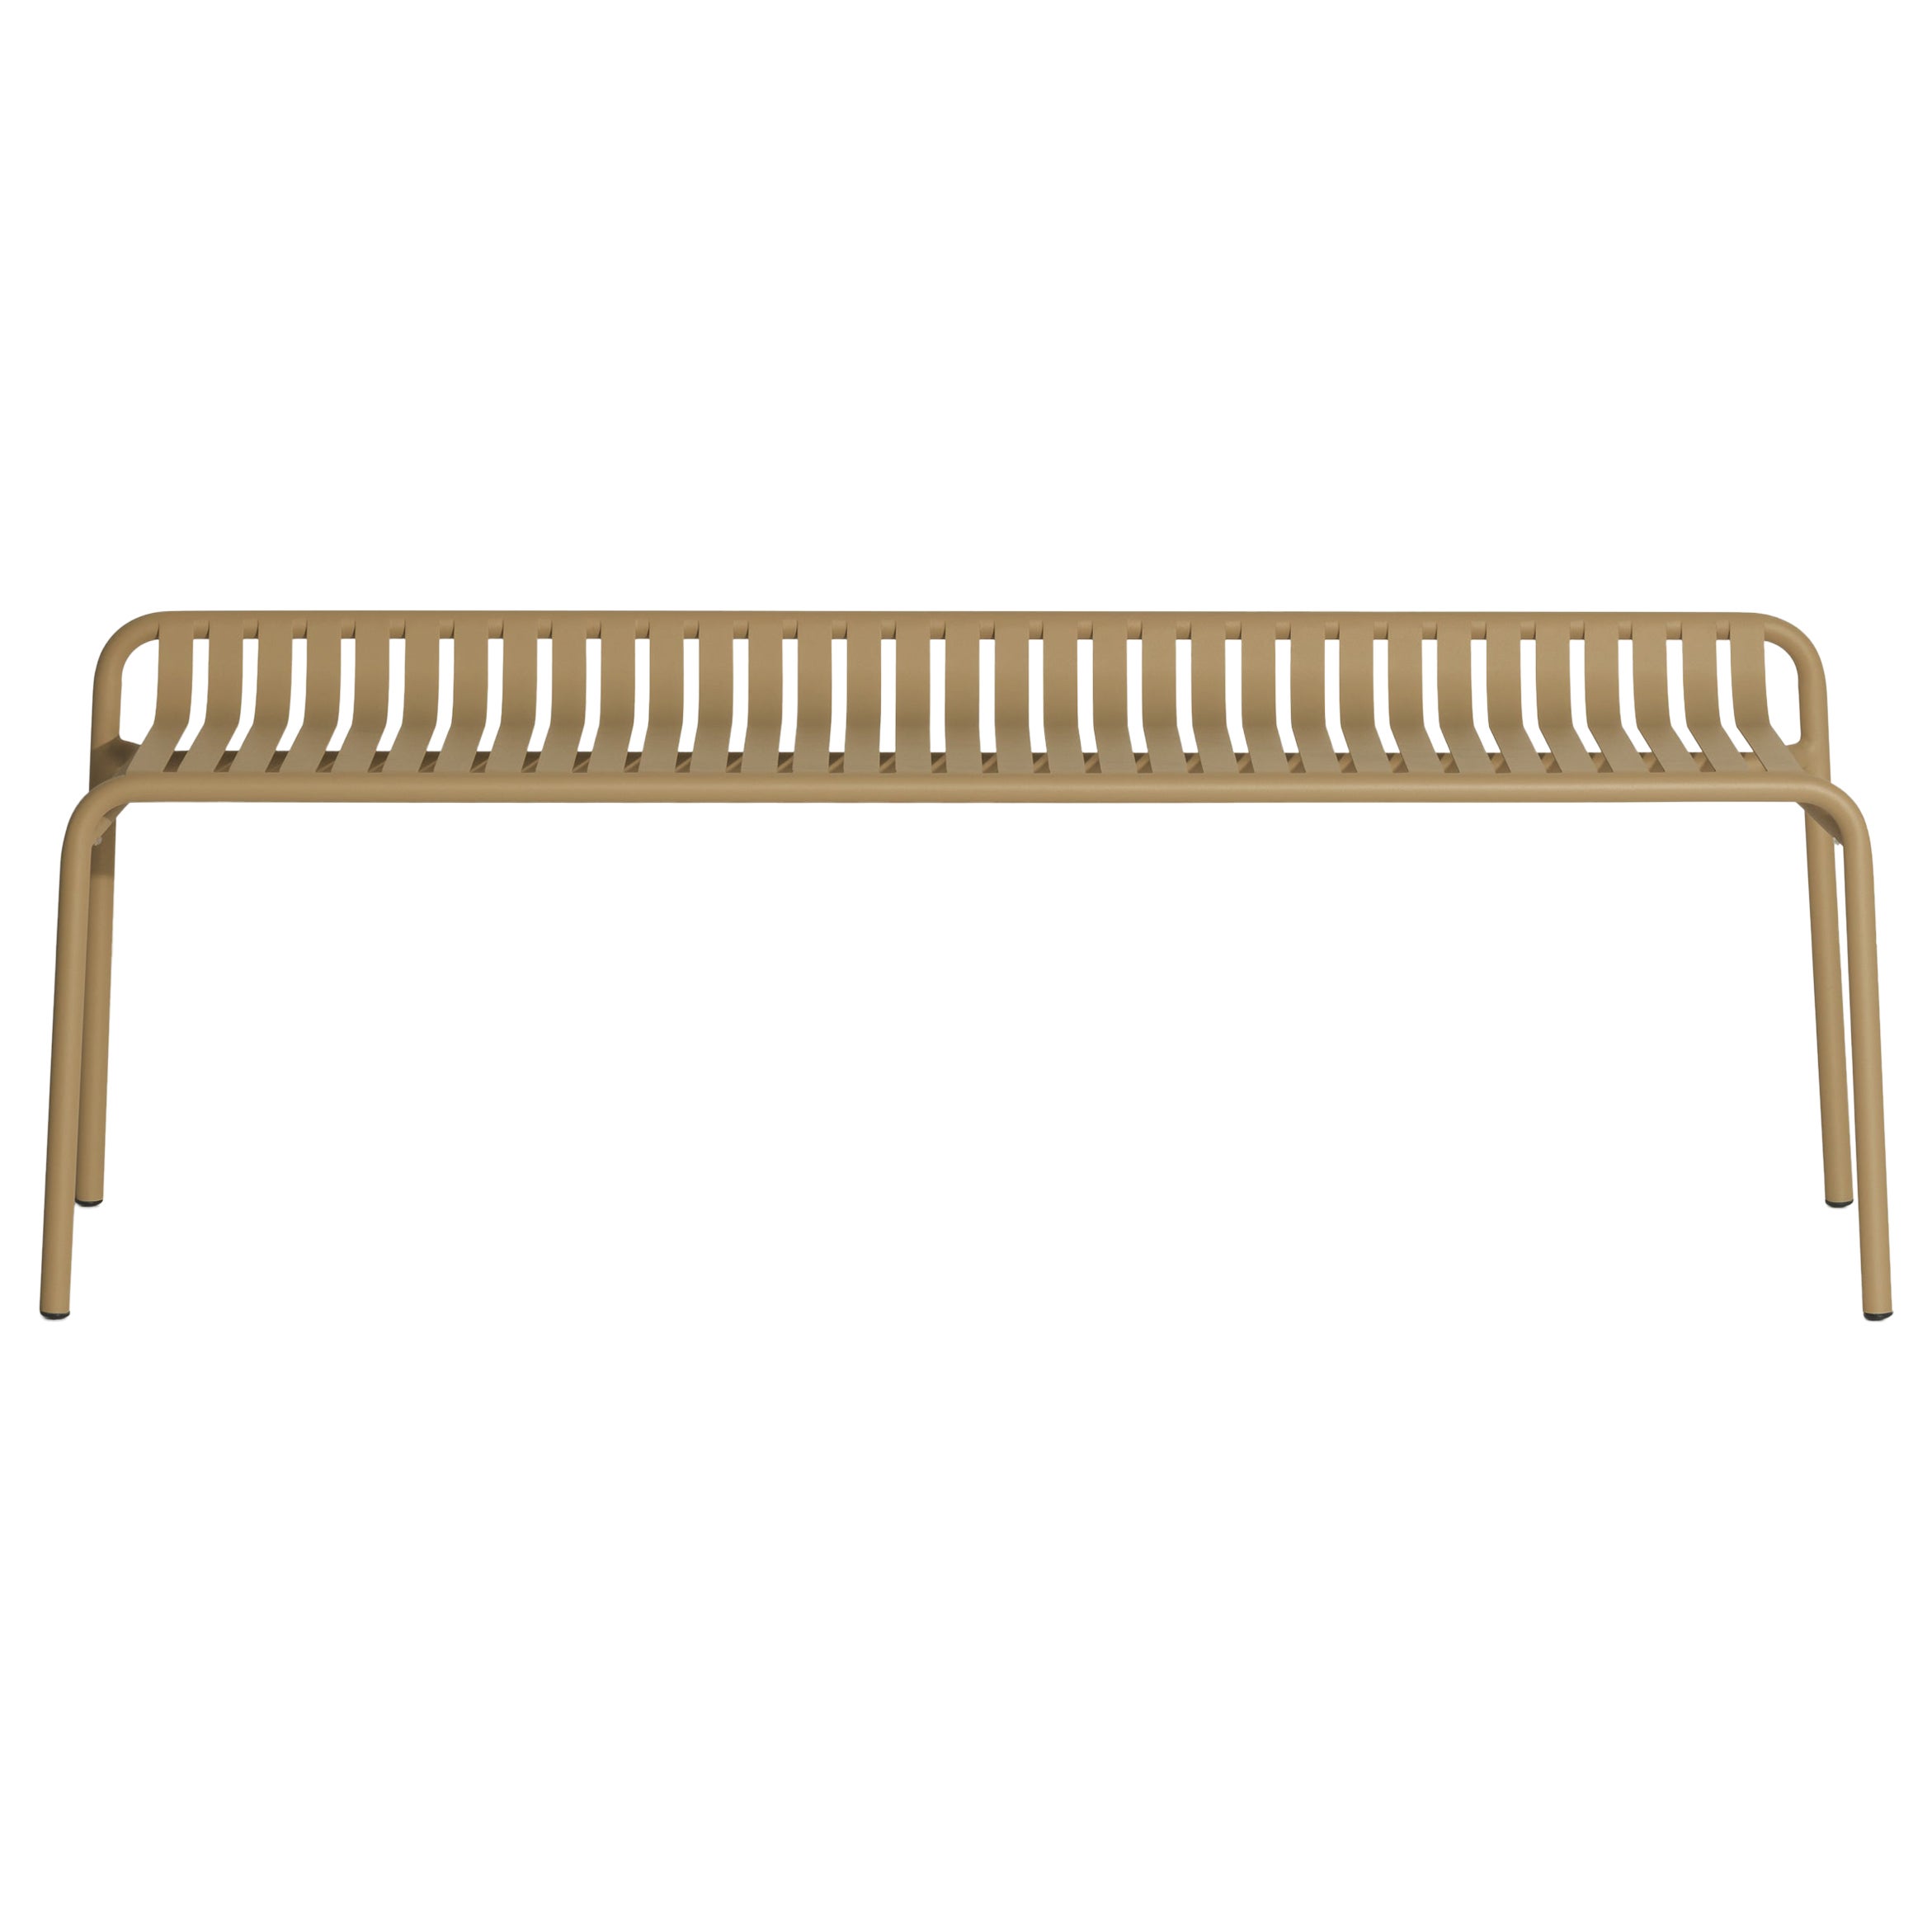 Petite Friture Week-End Bench without Back in Gold Aluminium, 2017  For Sale